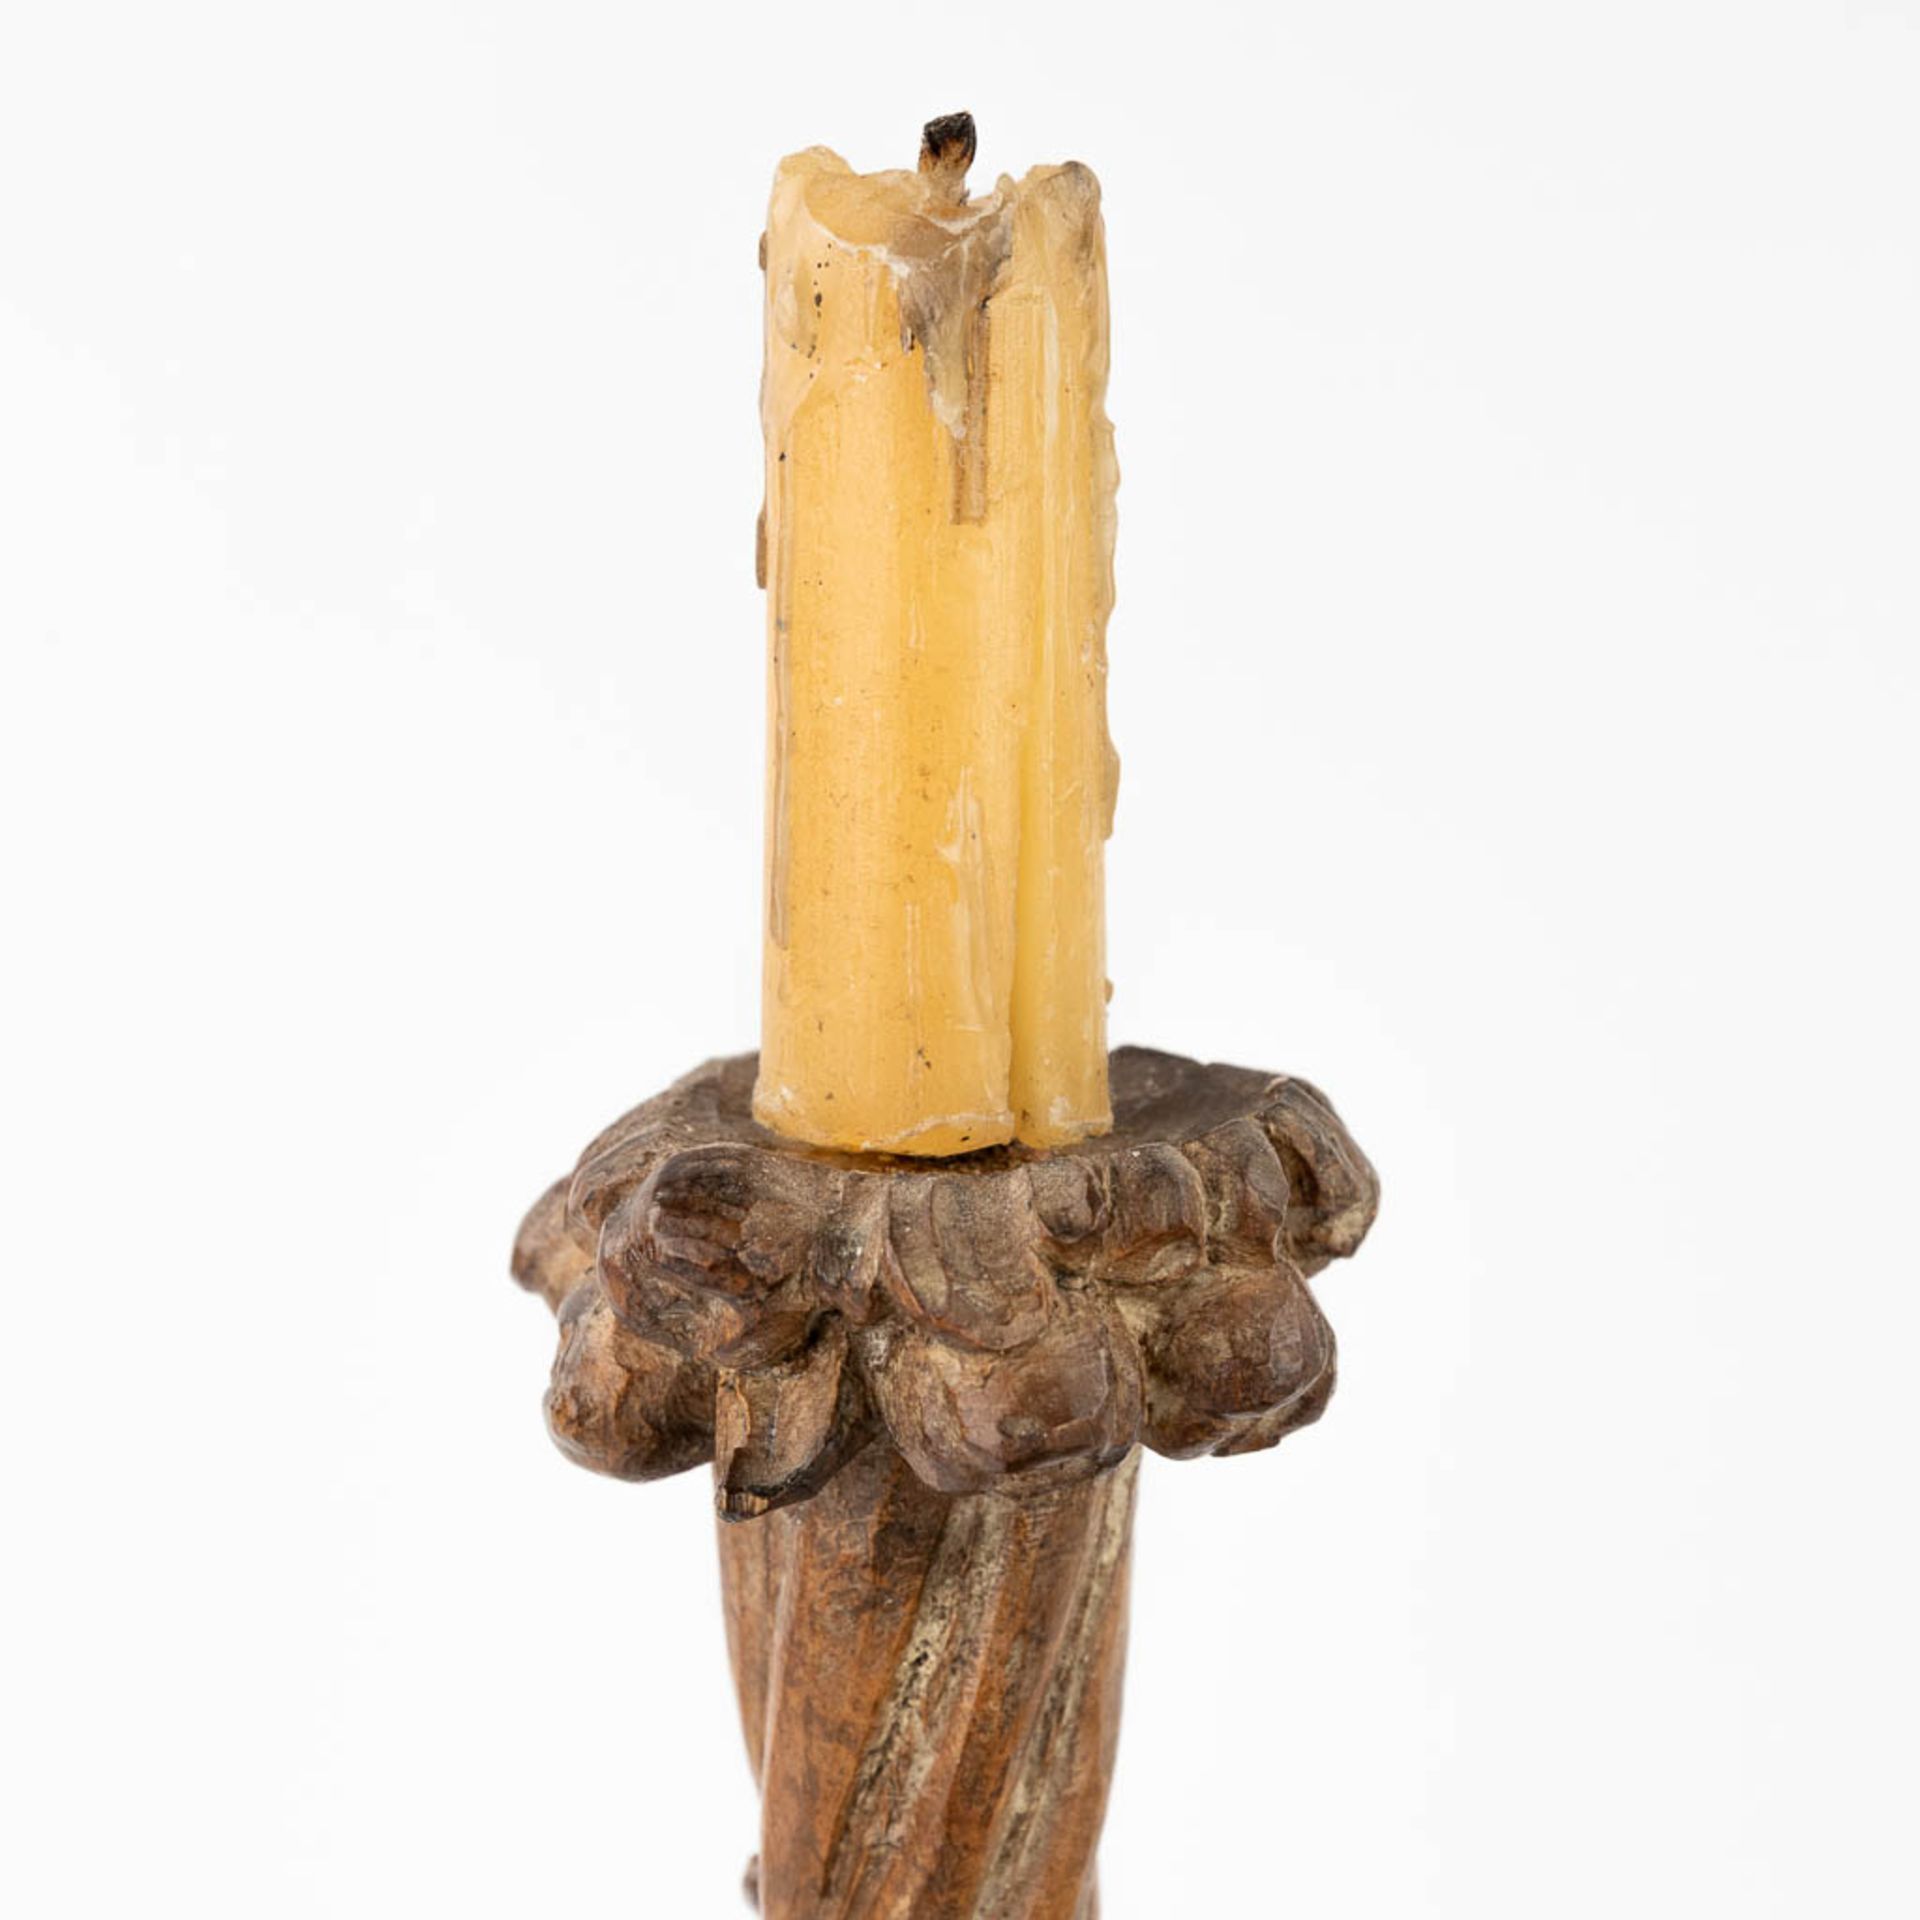 A pair of wood-sculptured candle holders, with putti. 19th C. (L:9 x W:12 x H:34 cm) - Image 8 of 12